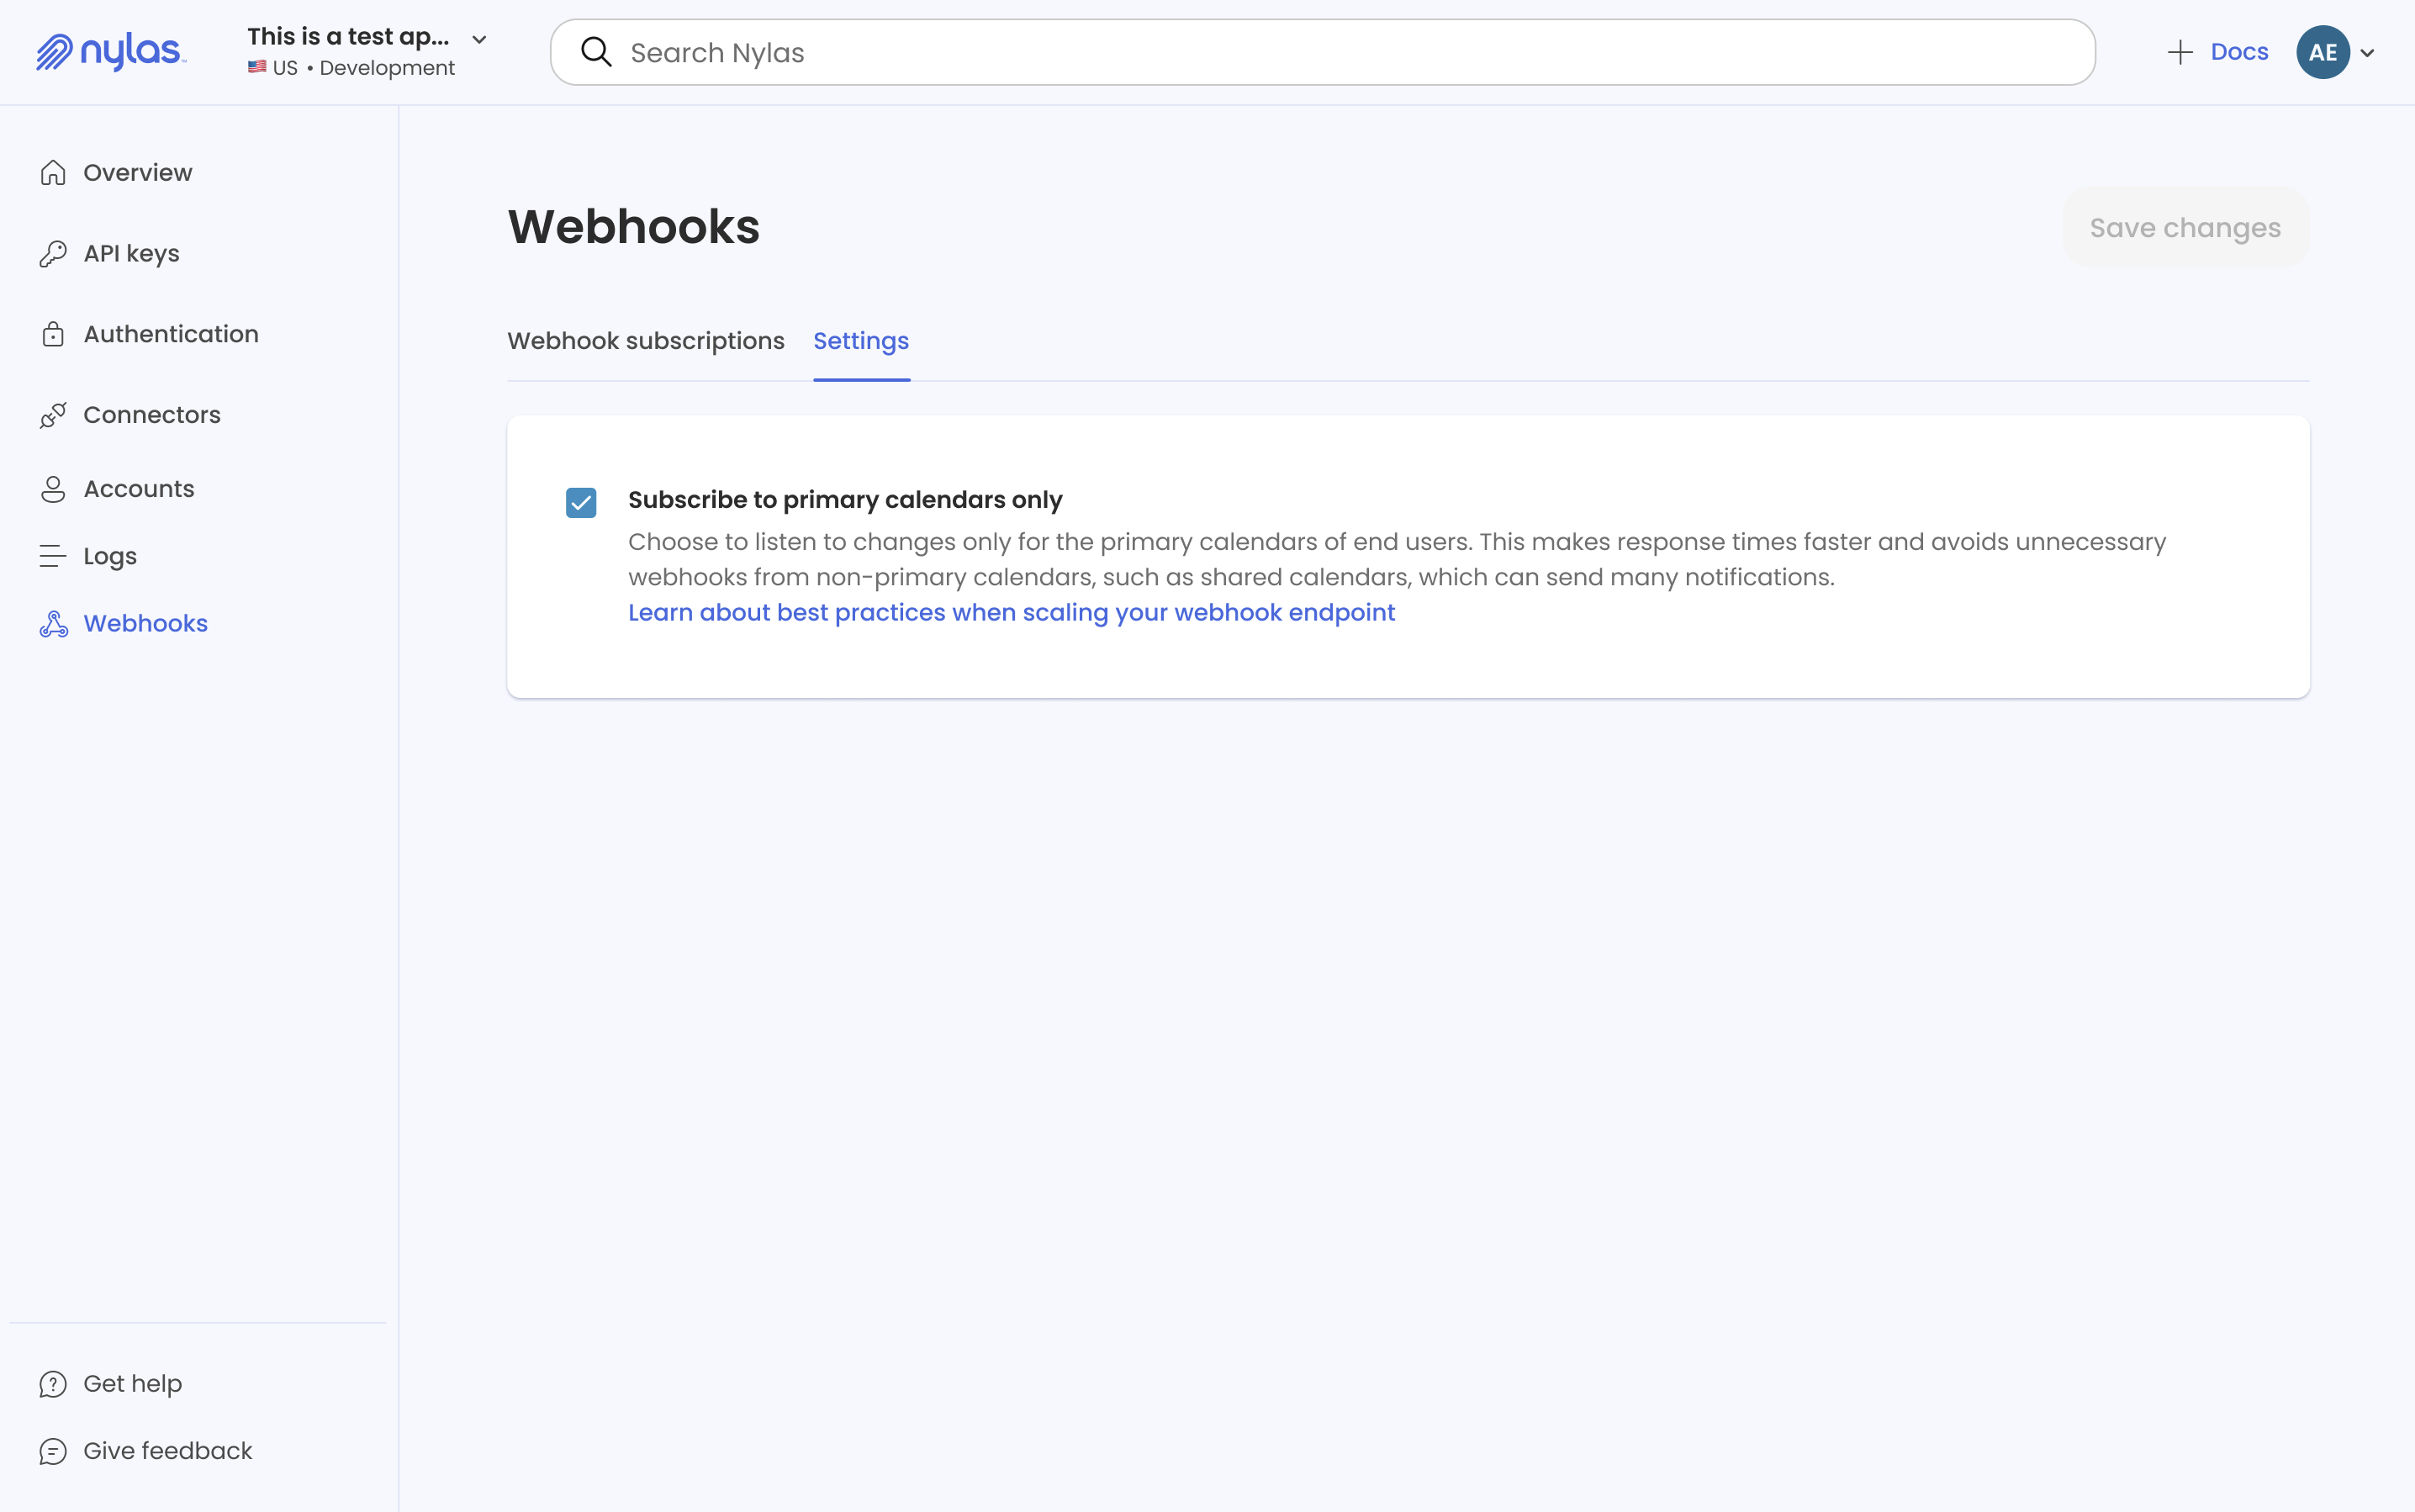 The Nylas Dashboard showing the "Webhooks settings" page. The "Subscribe to primary calendars only" option is selected.